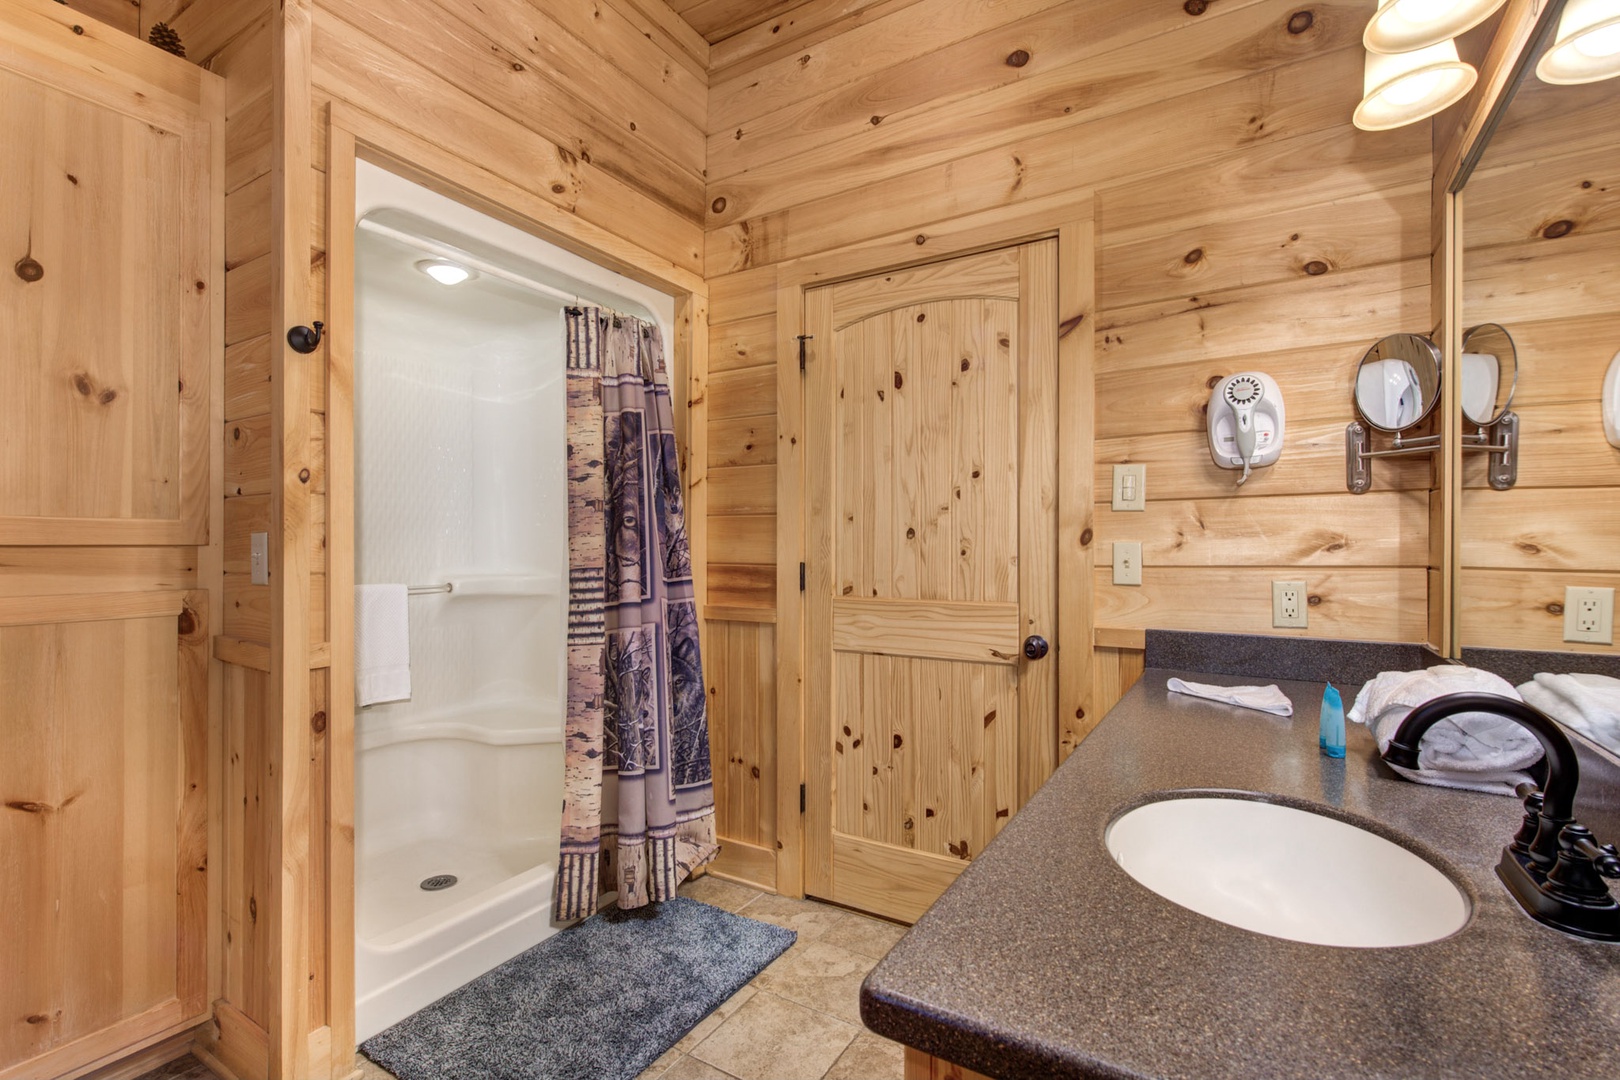 This Jack & Jill ensuite includes a single vanity, soaking tub, & shower